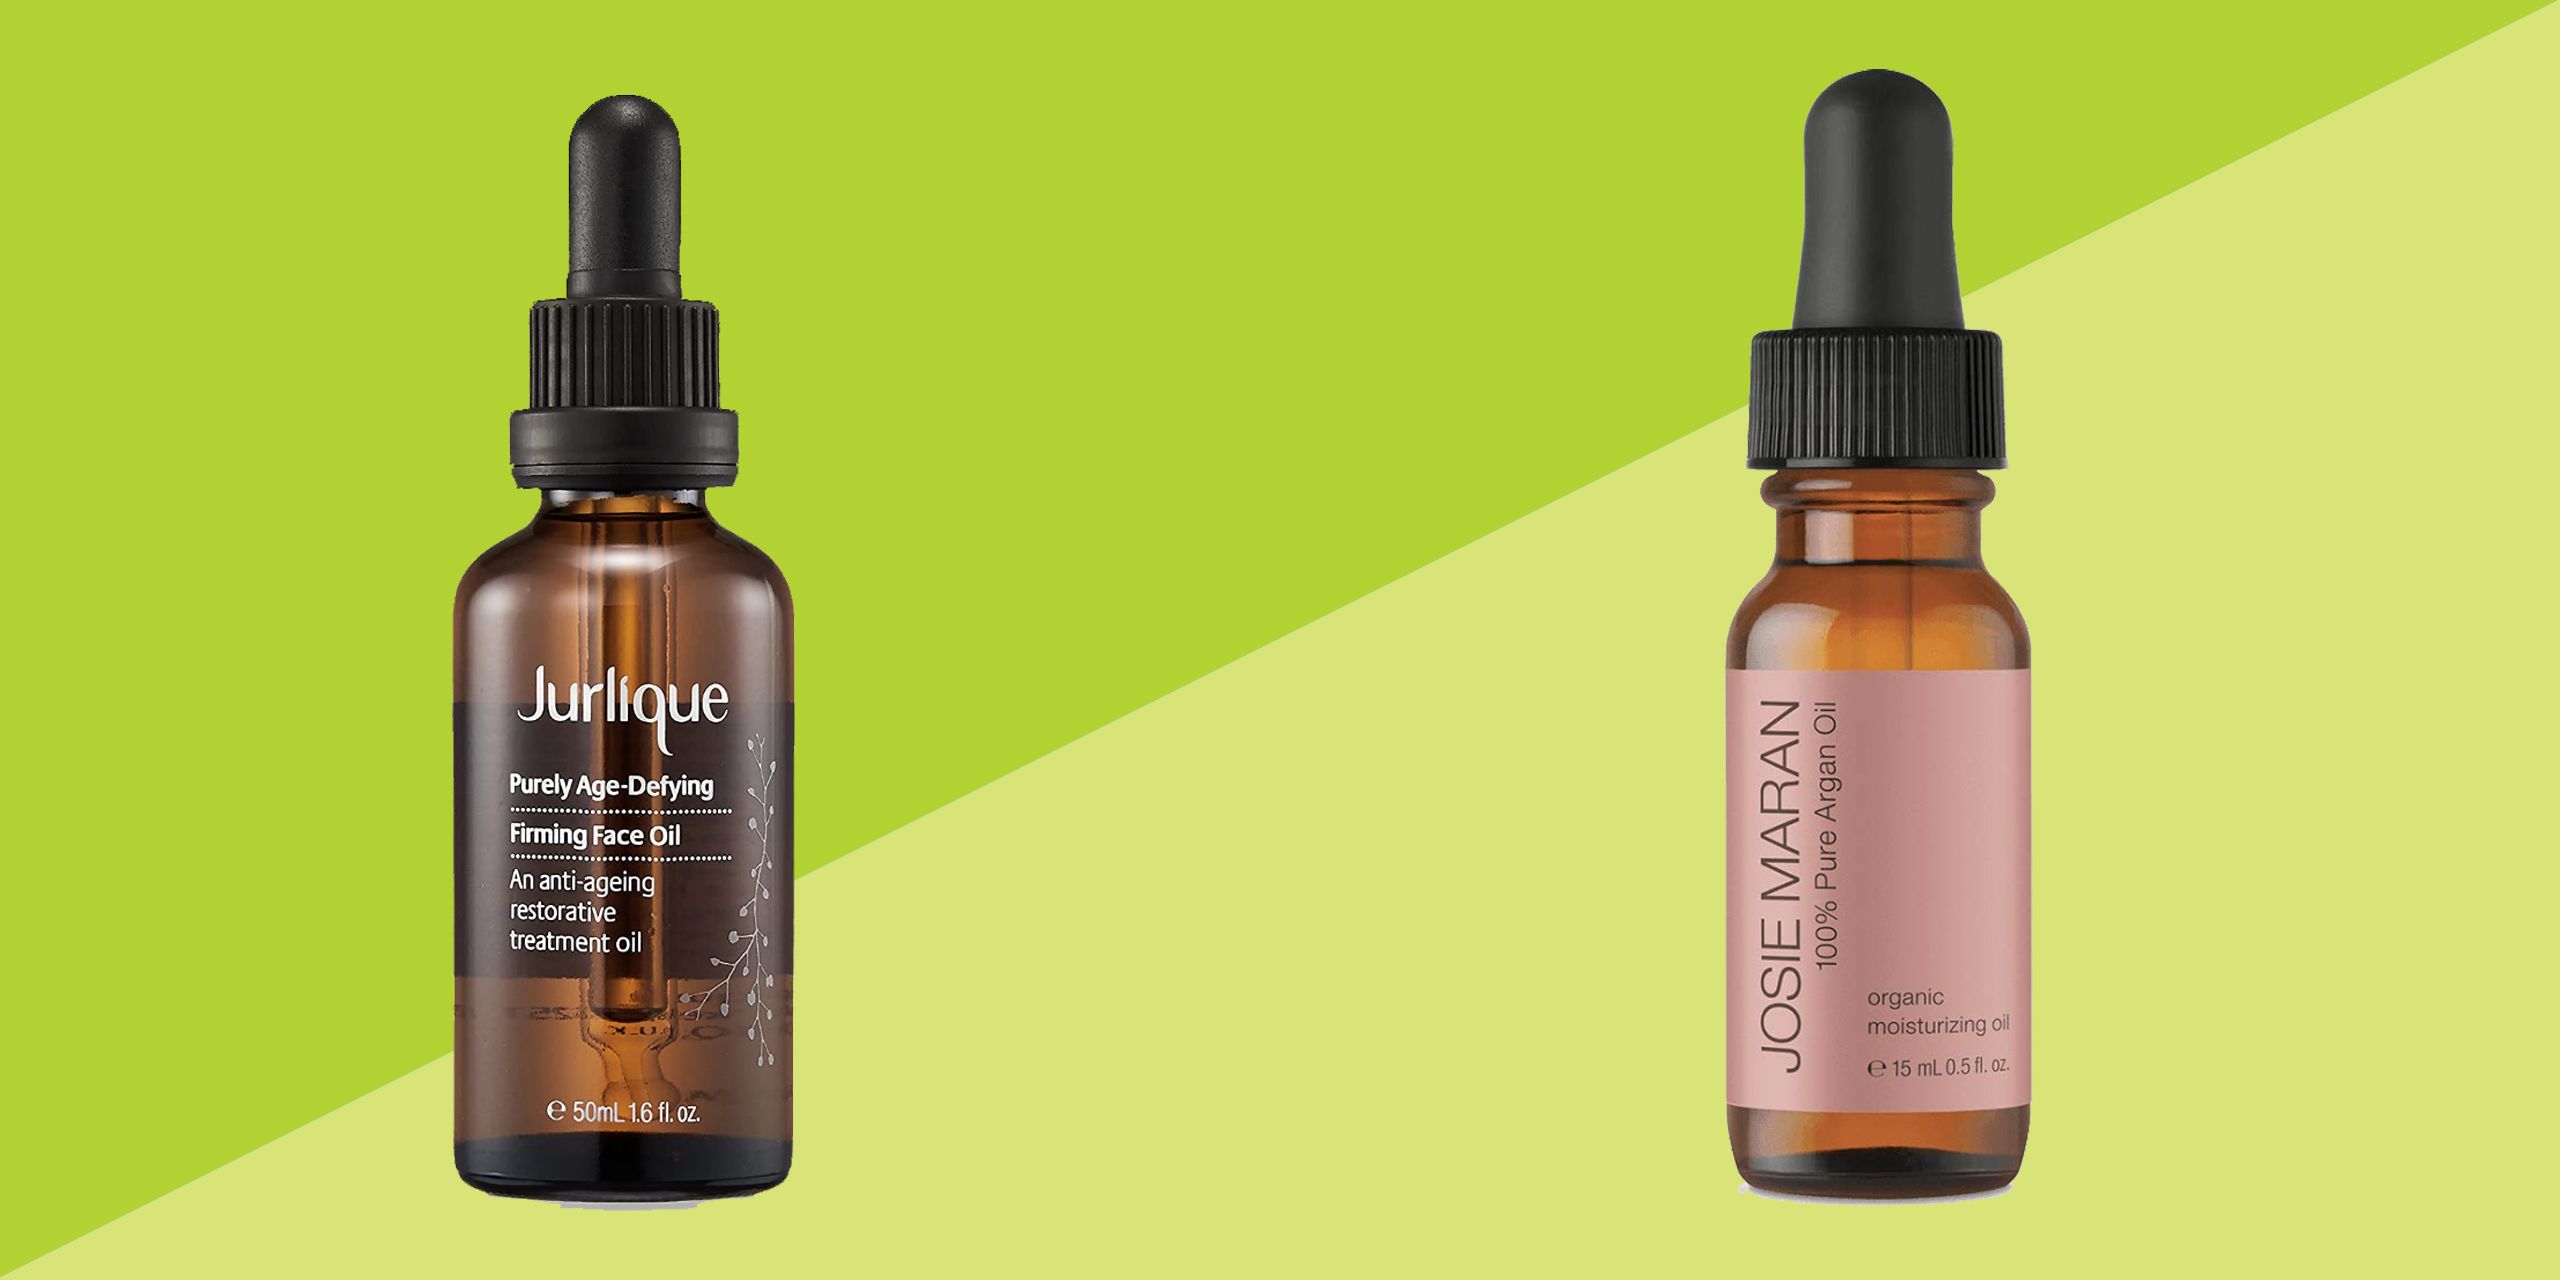 20 Best Face Oils for Every Skin Type, According to Dermatologists